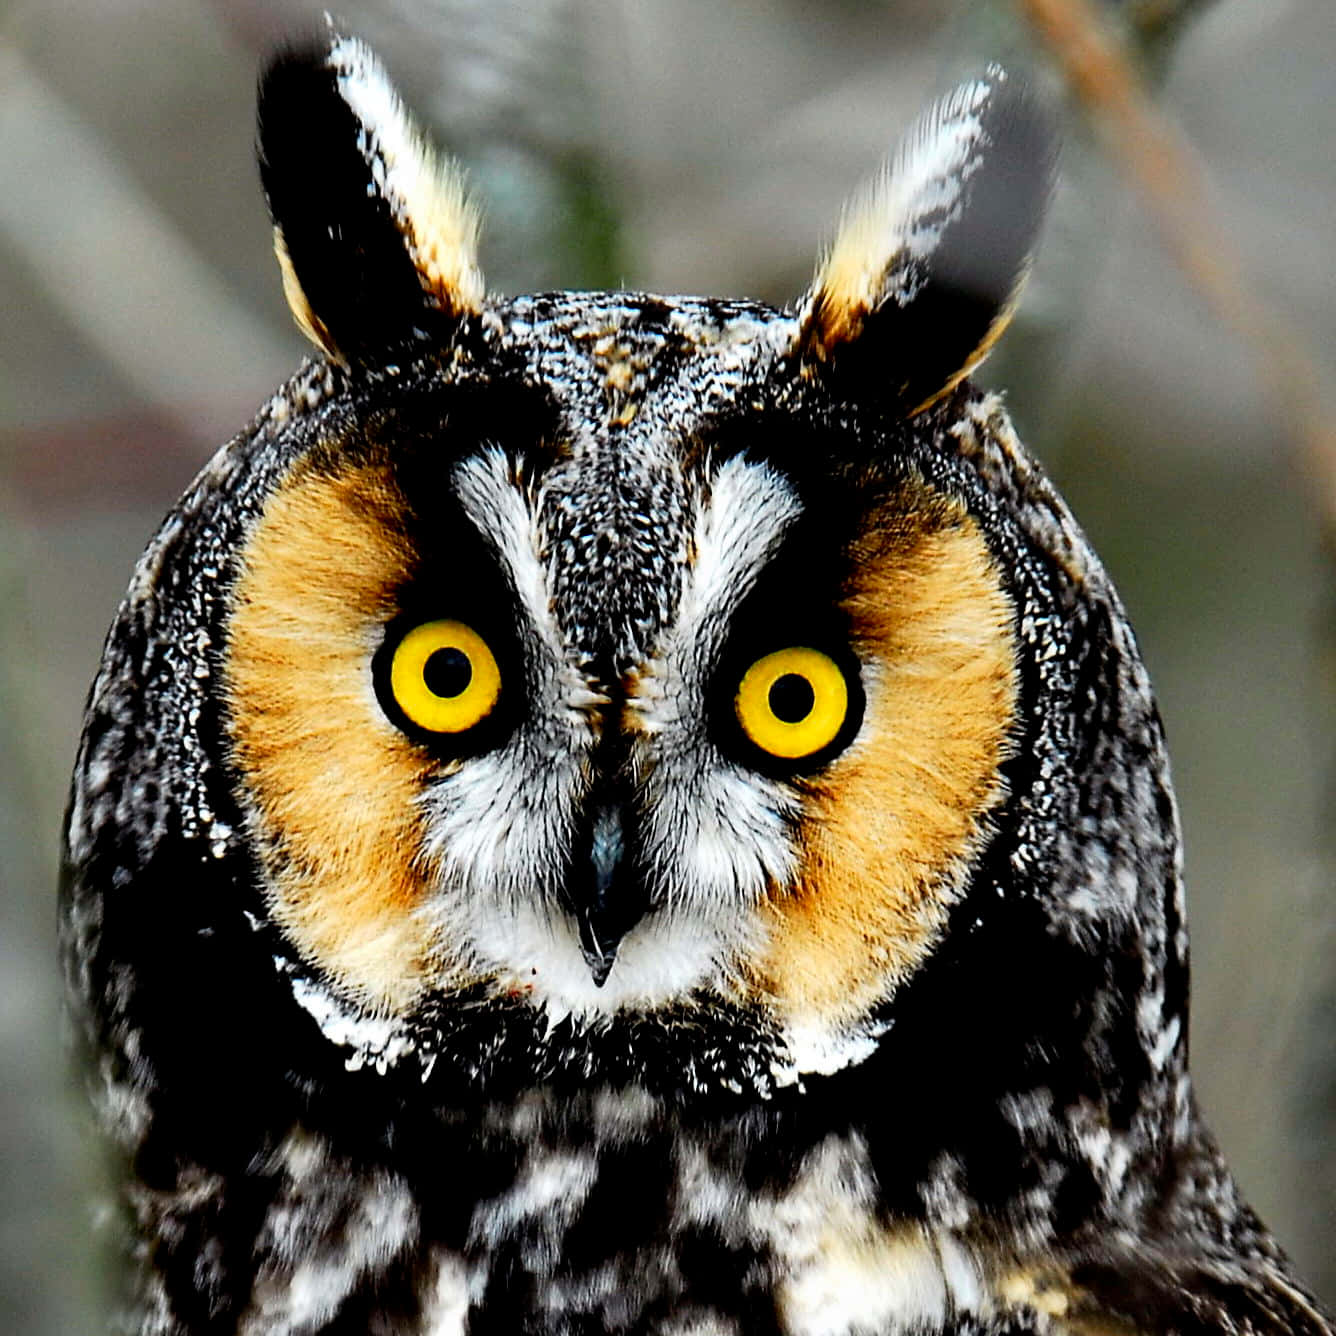 An Owl Peering Into The Distance